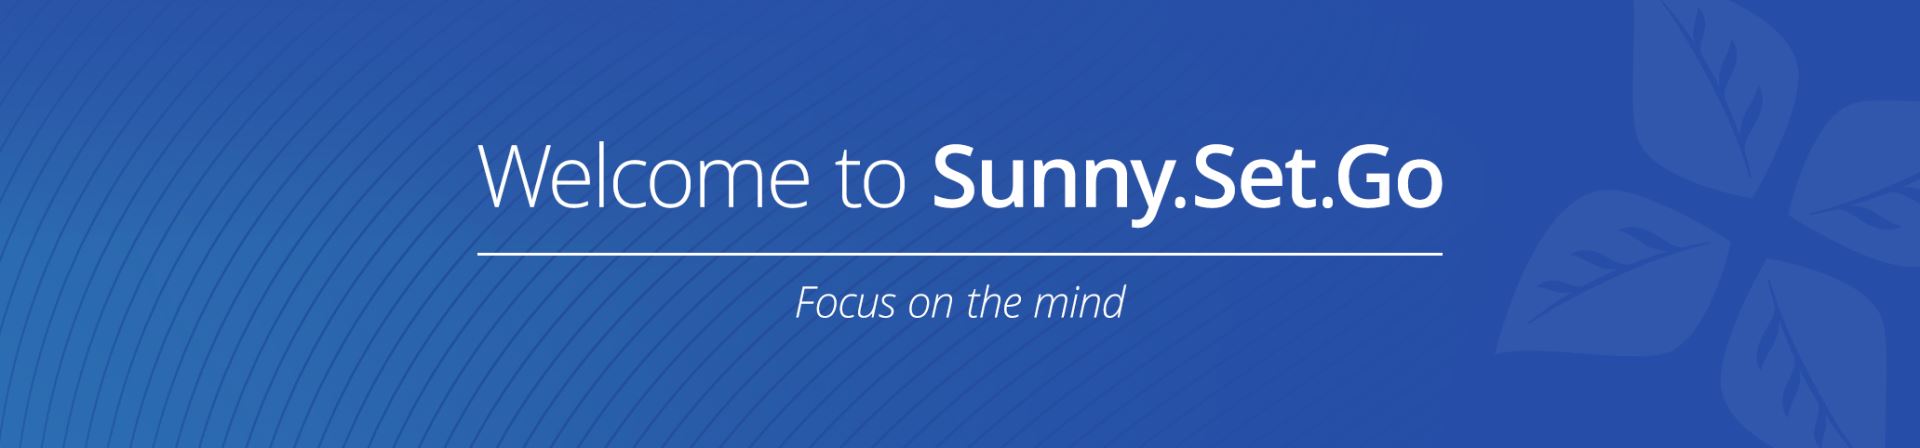 Sunny Set Go - resource for inpatients with depression at Sunnybrook